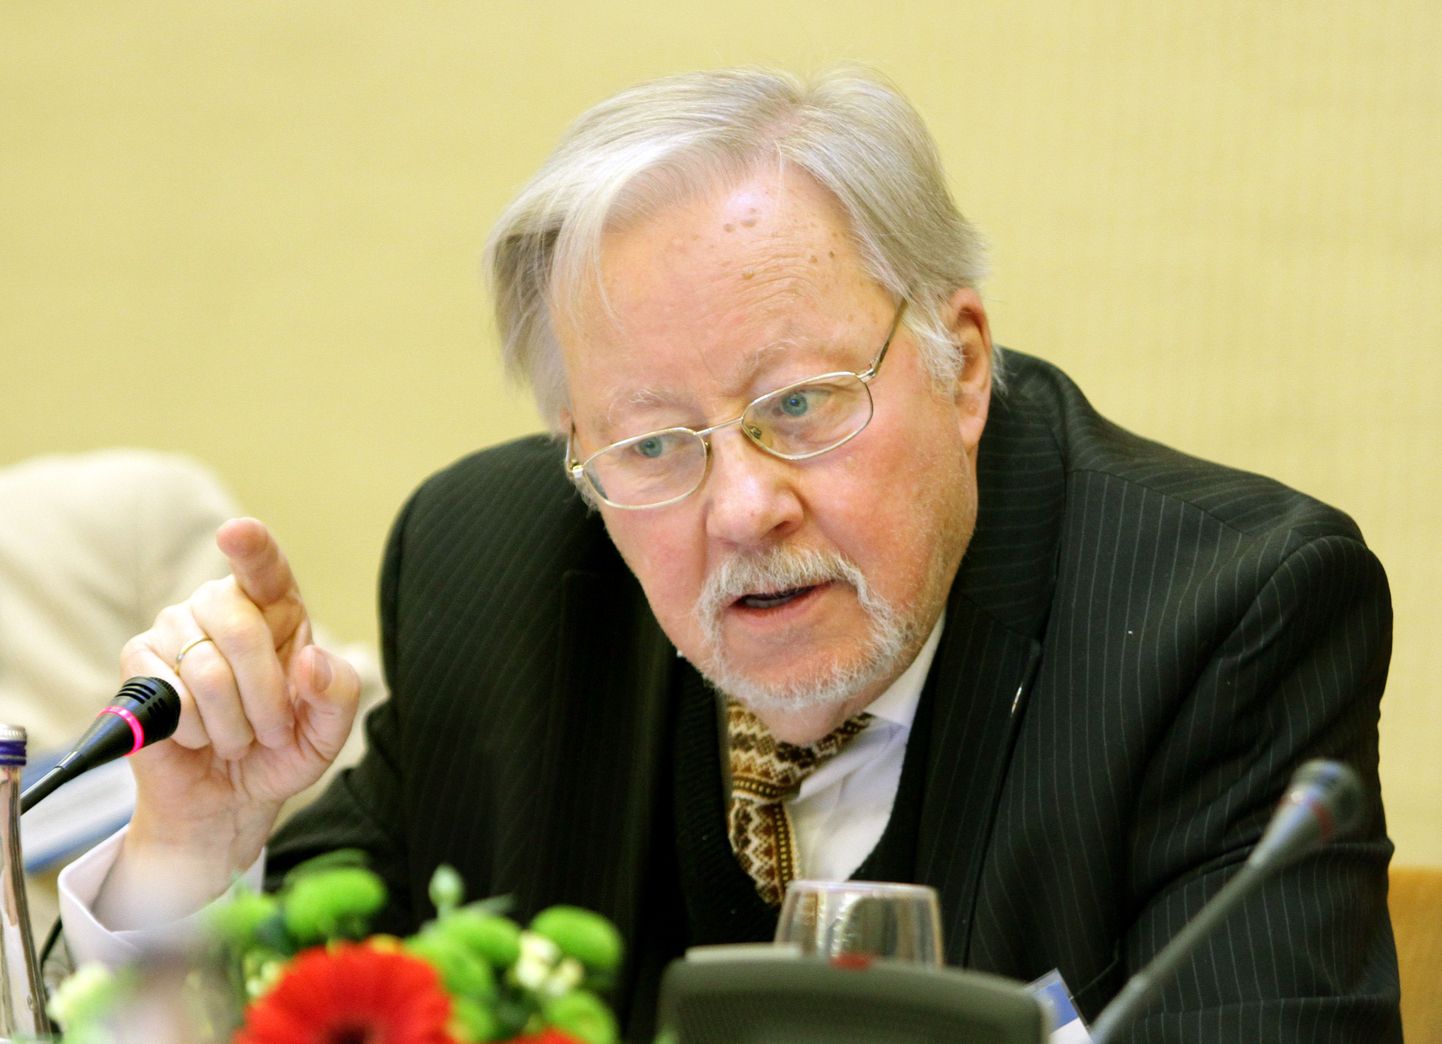 Vytautas Landsbergis, first post-communist Lithuania's president is pictured in Vilnius, Lithuania on March 10, 2015. A quarter-century after Lithuania's split from the Soviet Union, the architect of the Baltic state's independence Vytautas Landsbergis has warned that Russian President Vladimir Putin's brand of imperialism risks new wars in Europe.   AFP PHOTO / PETRAS MALUKAS